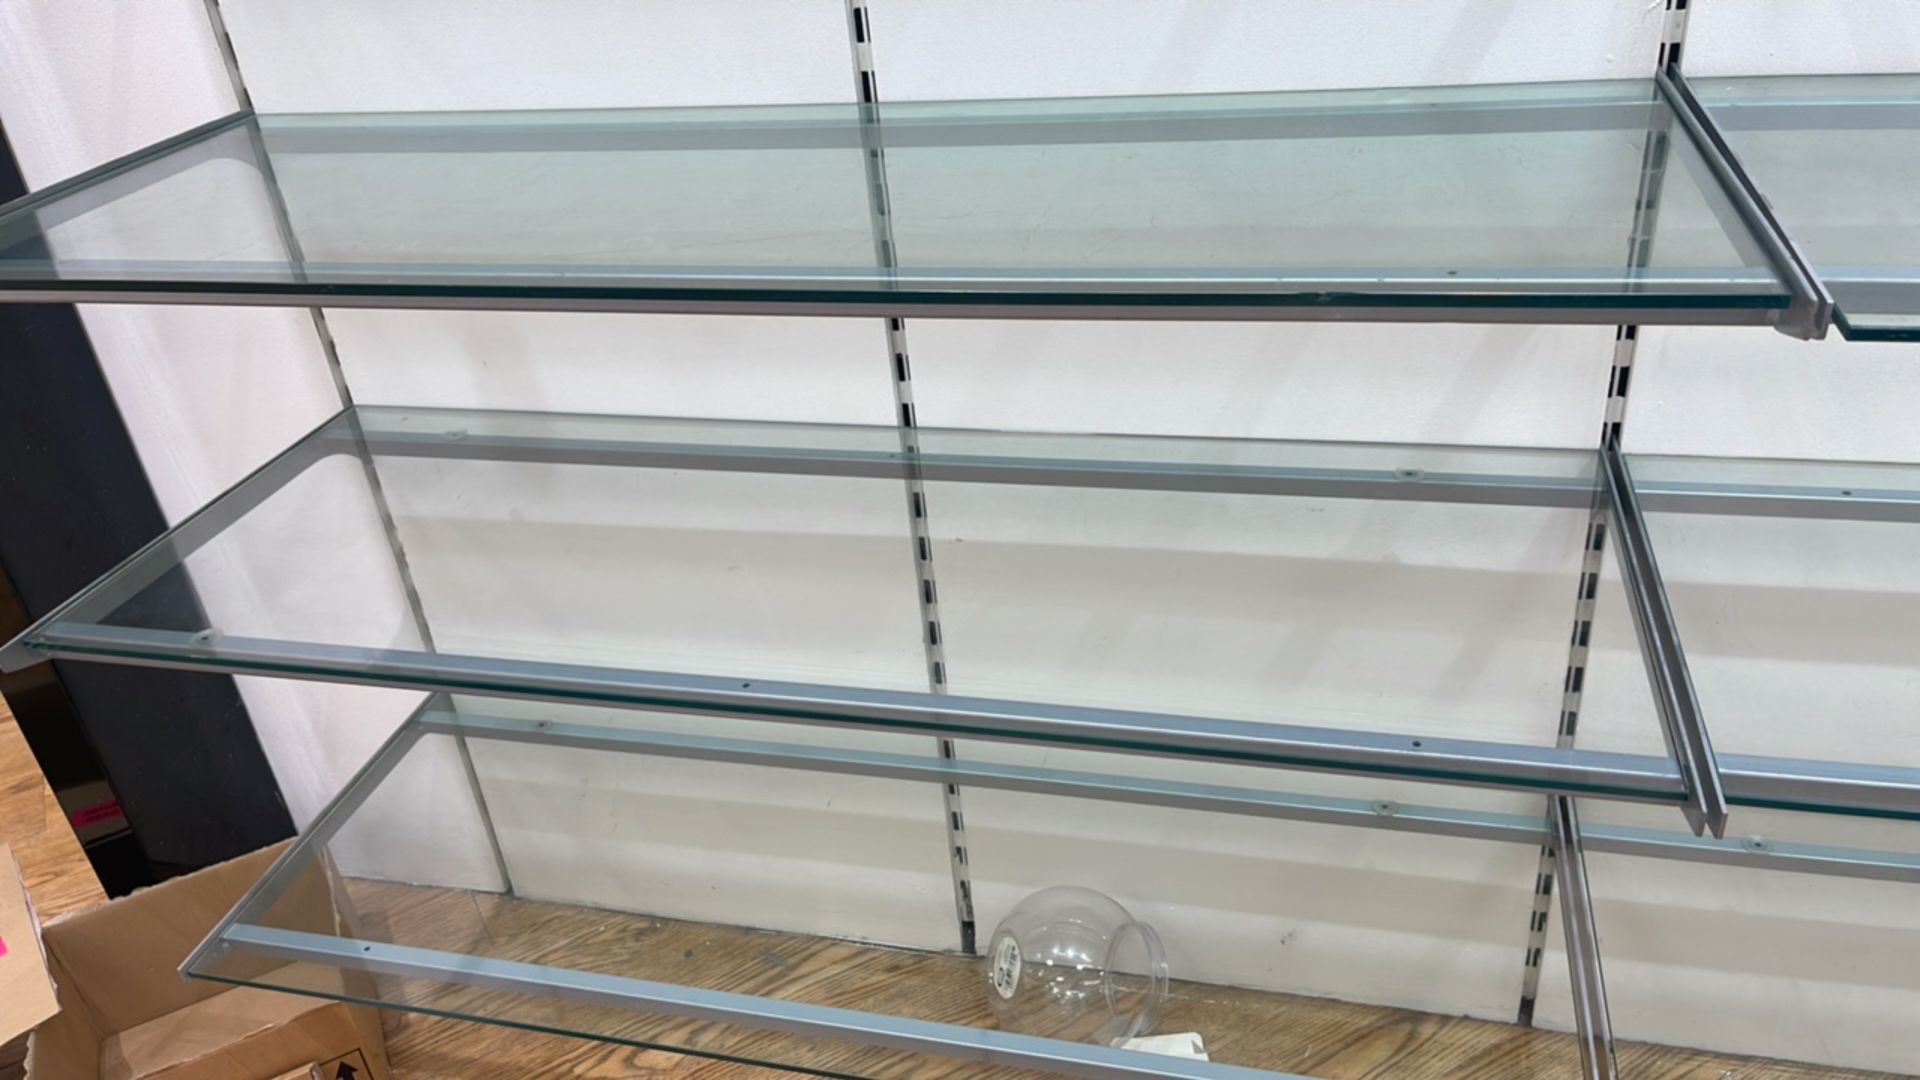 Wall of Glass Shelving - Image 2 of 3